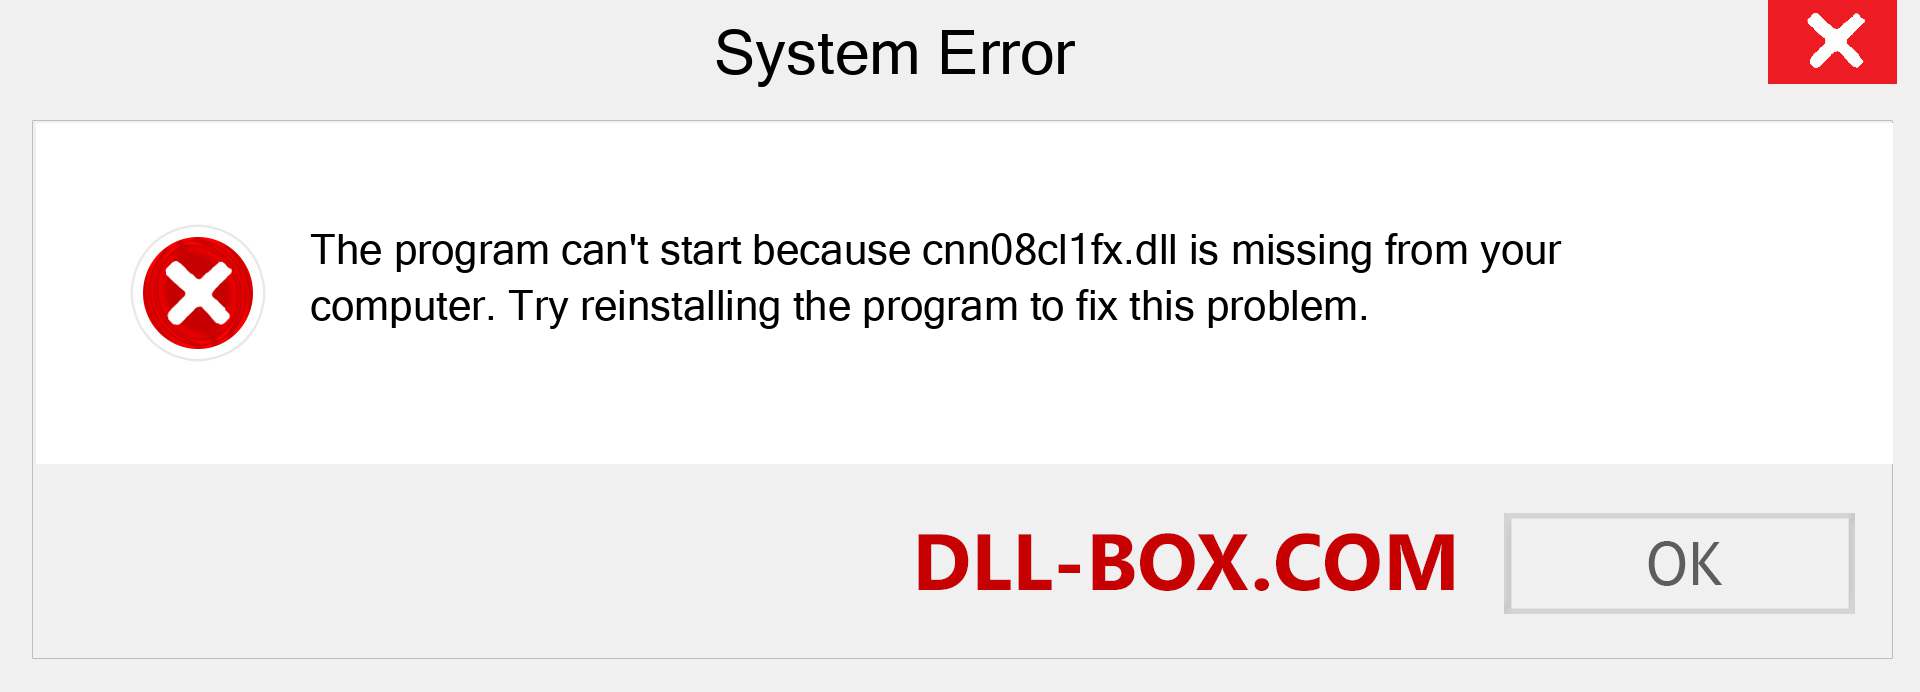  cnn08cl1fx.dll file is missing?. Download for Windows 7, 8, 10 - Fix  cnn08cl1fx dll Missing Error on Windows, photos, images